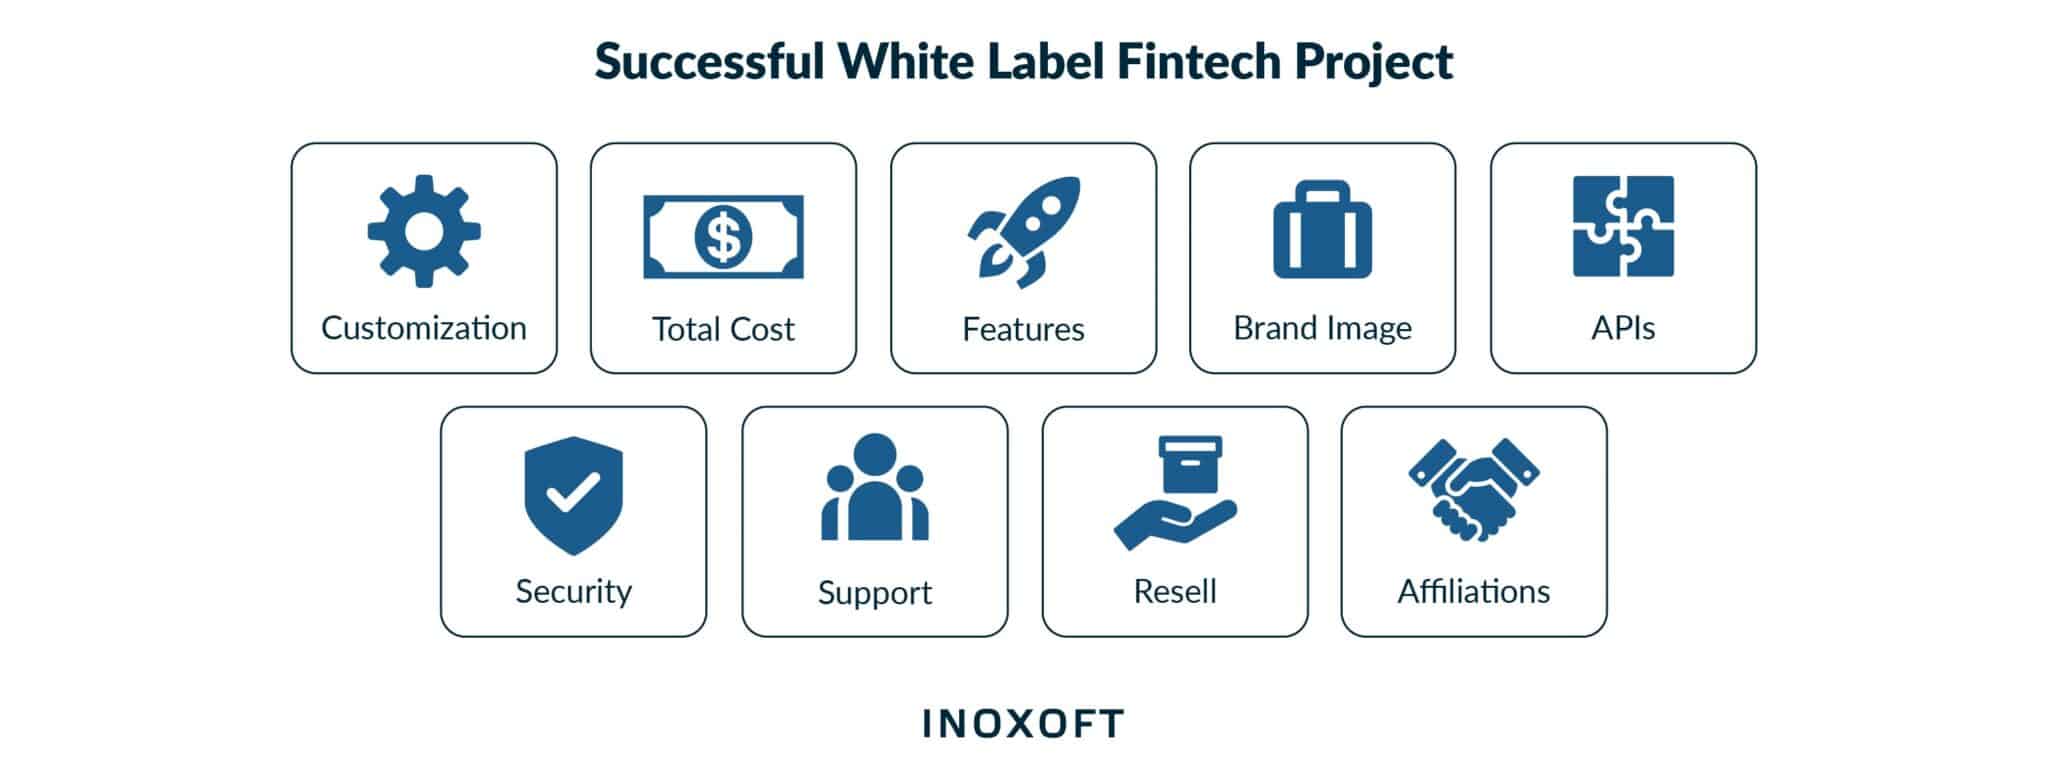 How to Create a Successful White Label Fintech Project?